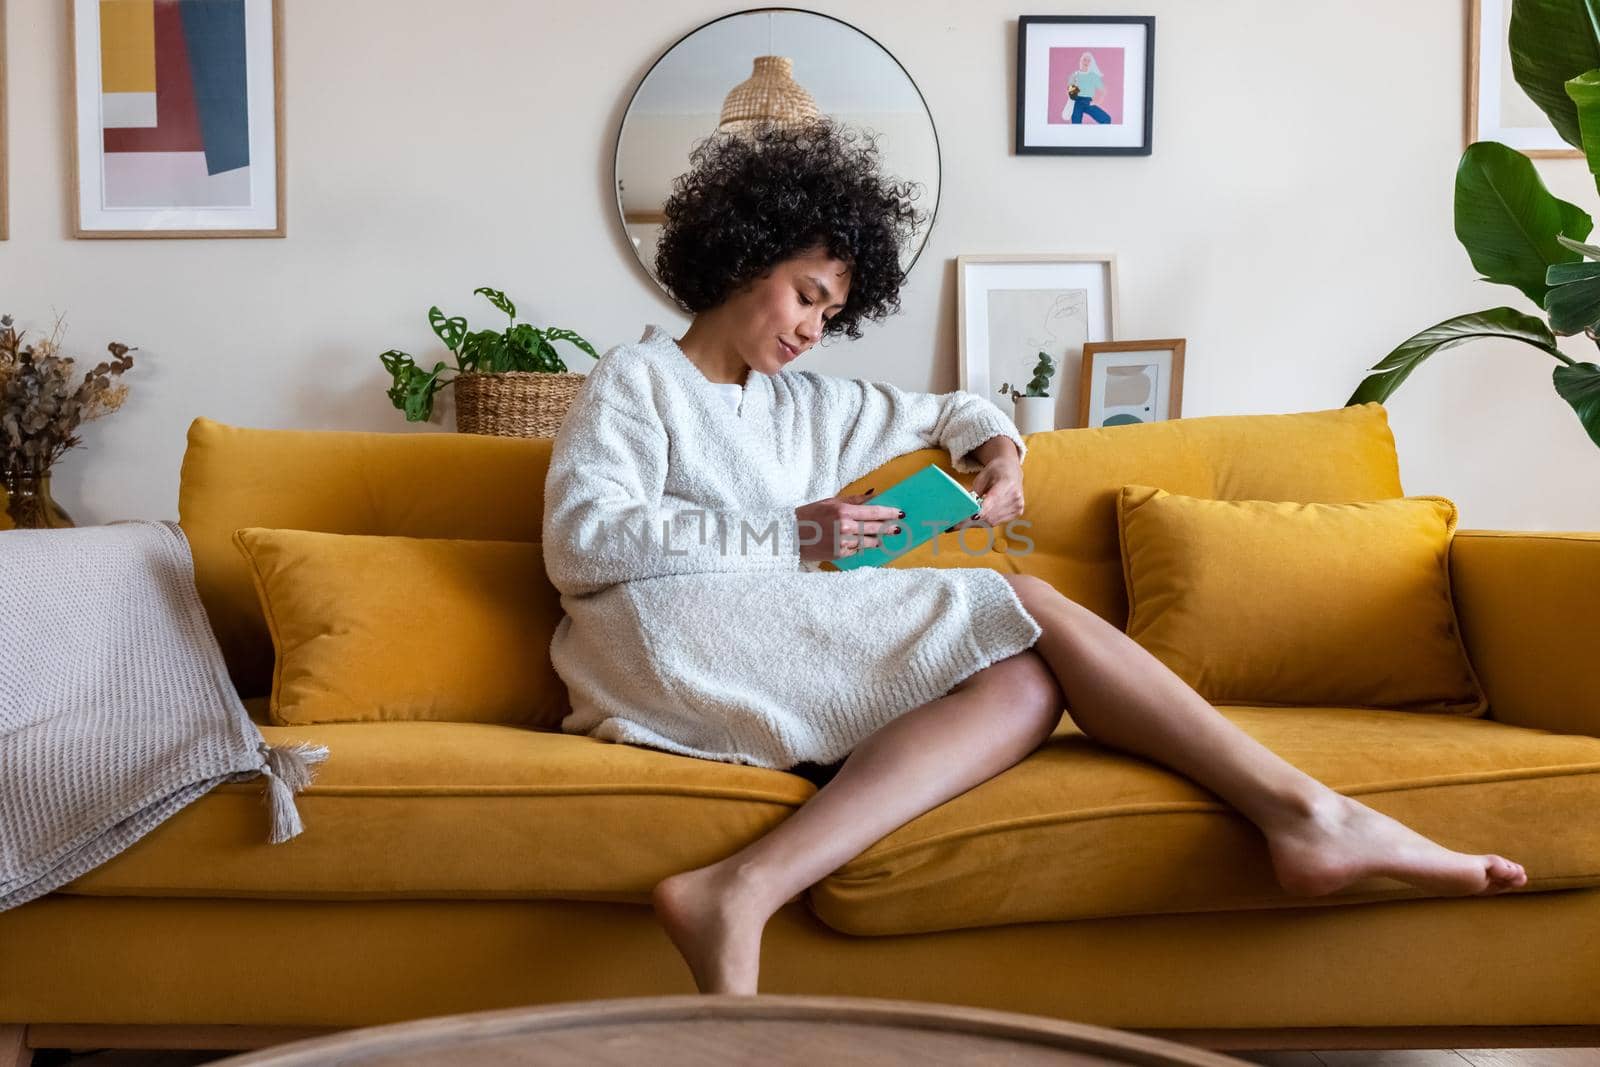 African american woman relaxing at home reading a book sitting on couch. Literature and lifestyle concept.